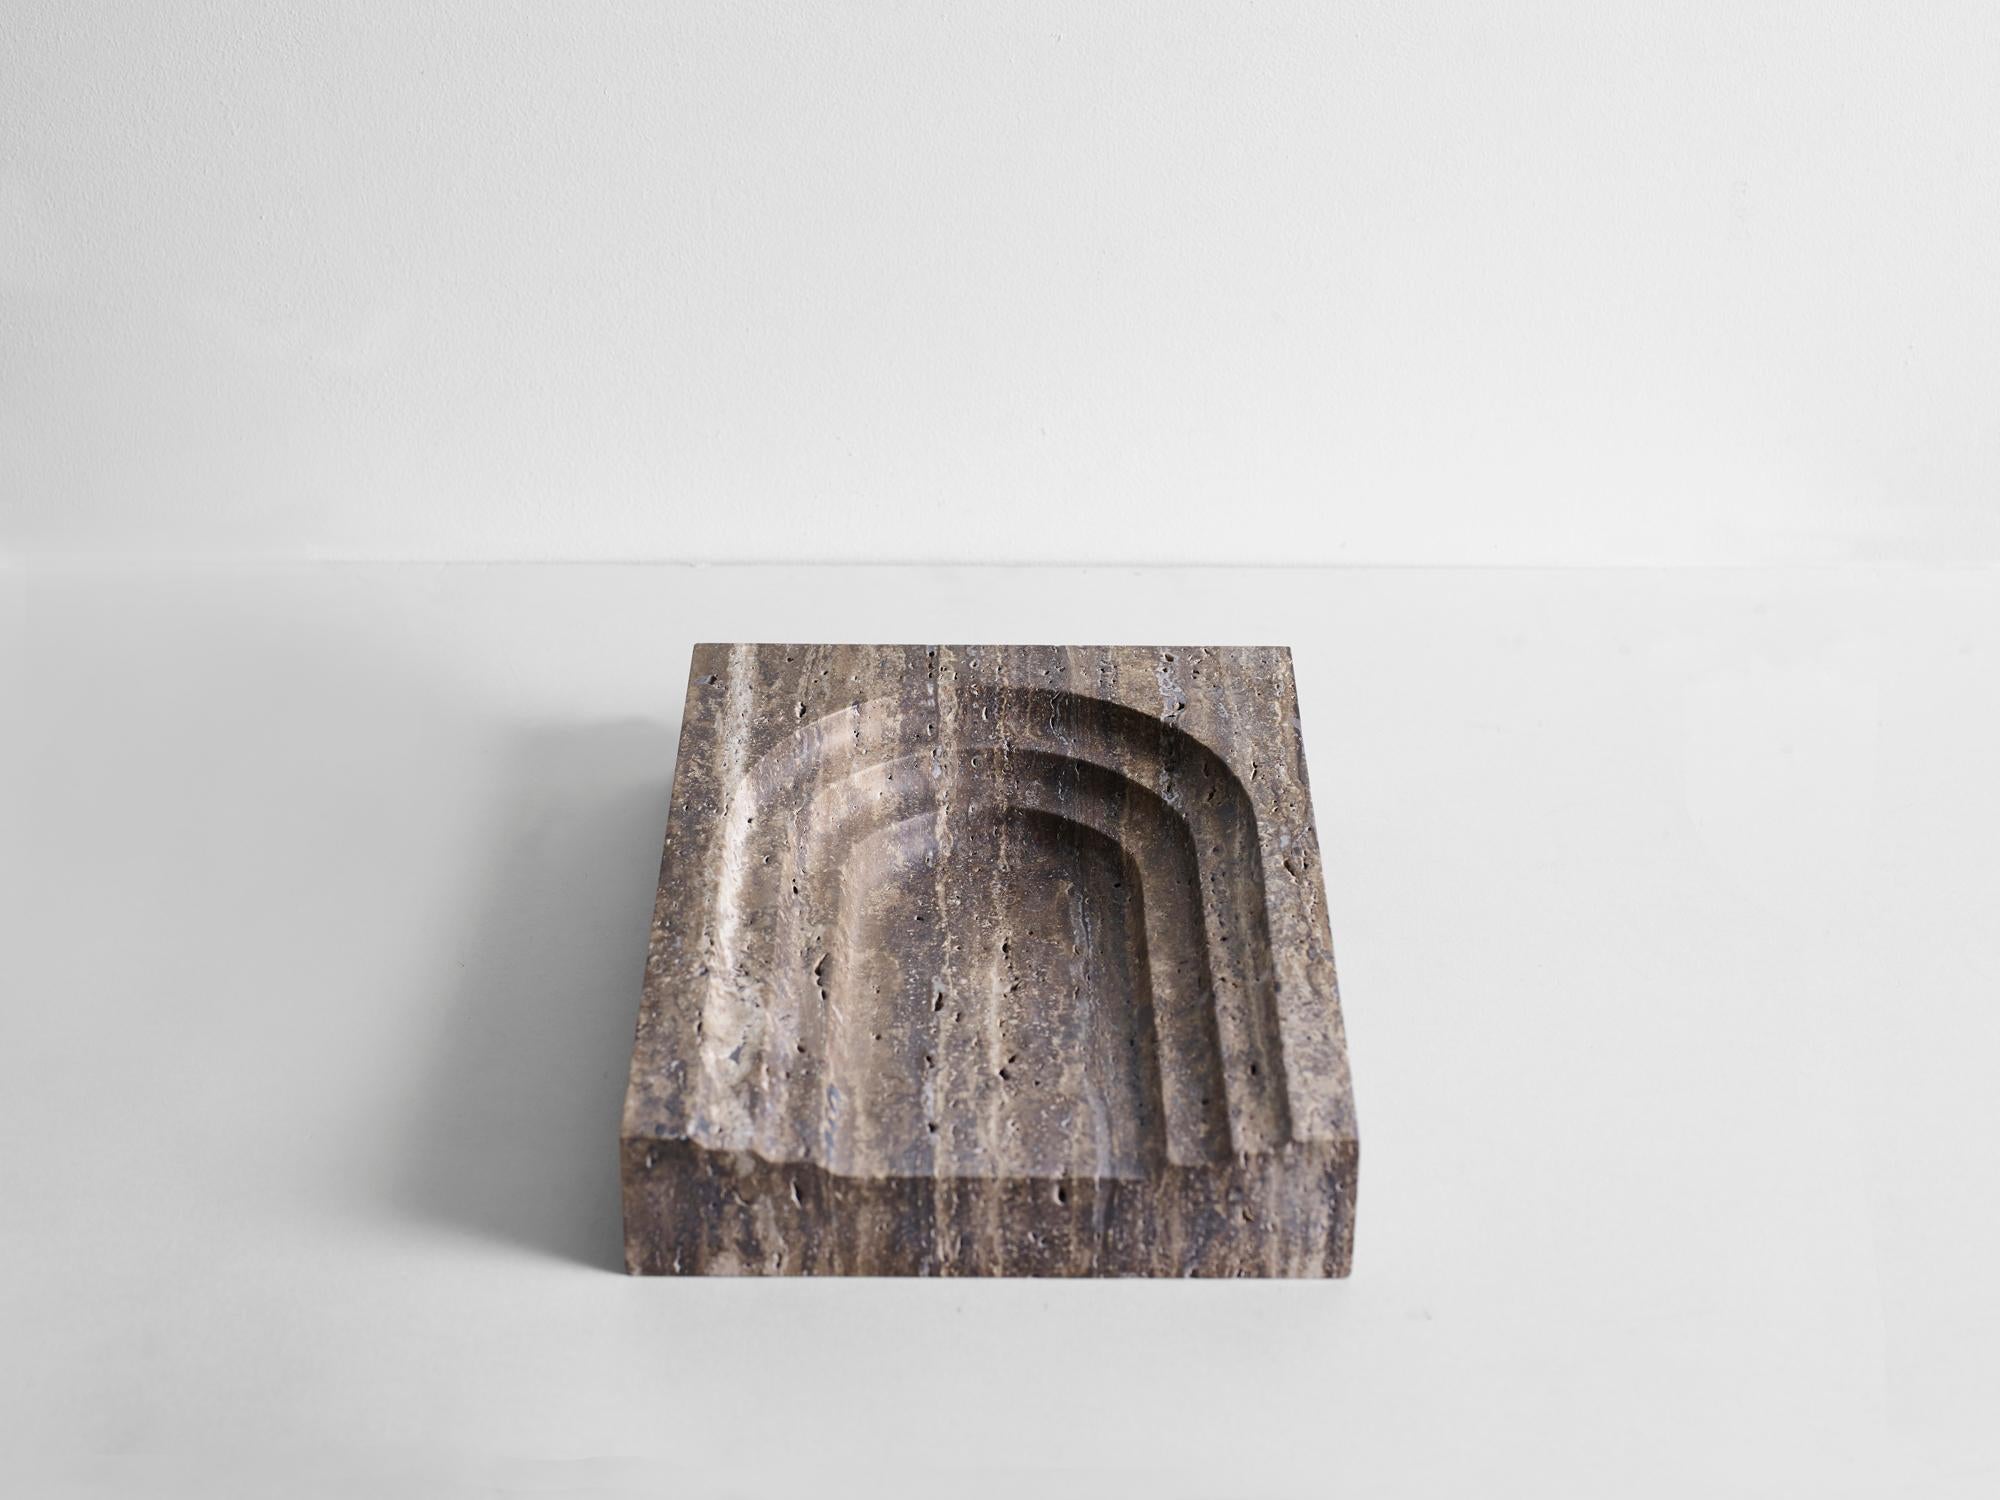 Black Travertine Block Thoronet Dish by Henry Wilson
Dimensions: W 24 x D 33 x H 6 cm
Materials: Black Travertine

This sculptural item is handmade in Sydney Australia.

Thoronet dish, shares its' name and arched lines with the Abby in the south of